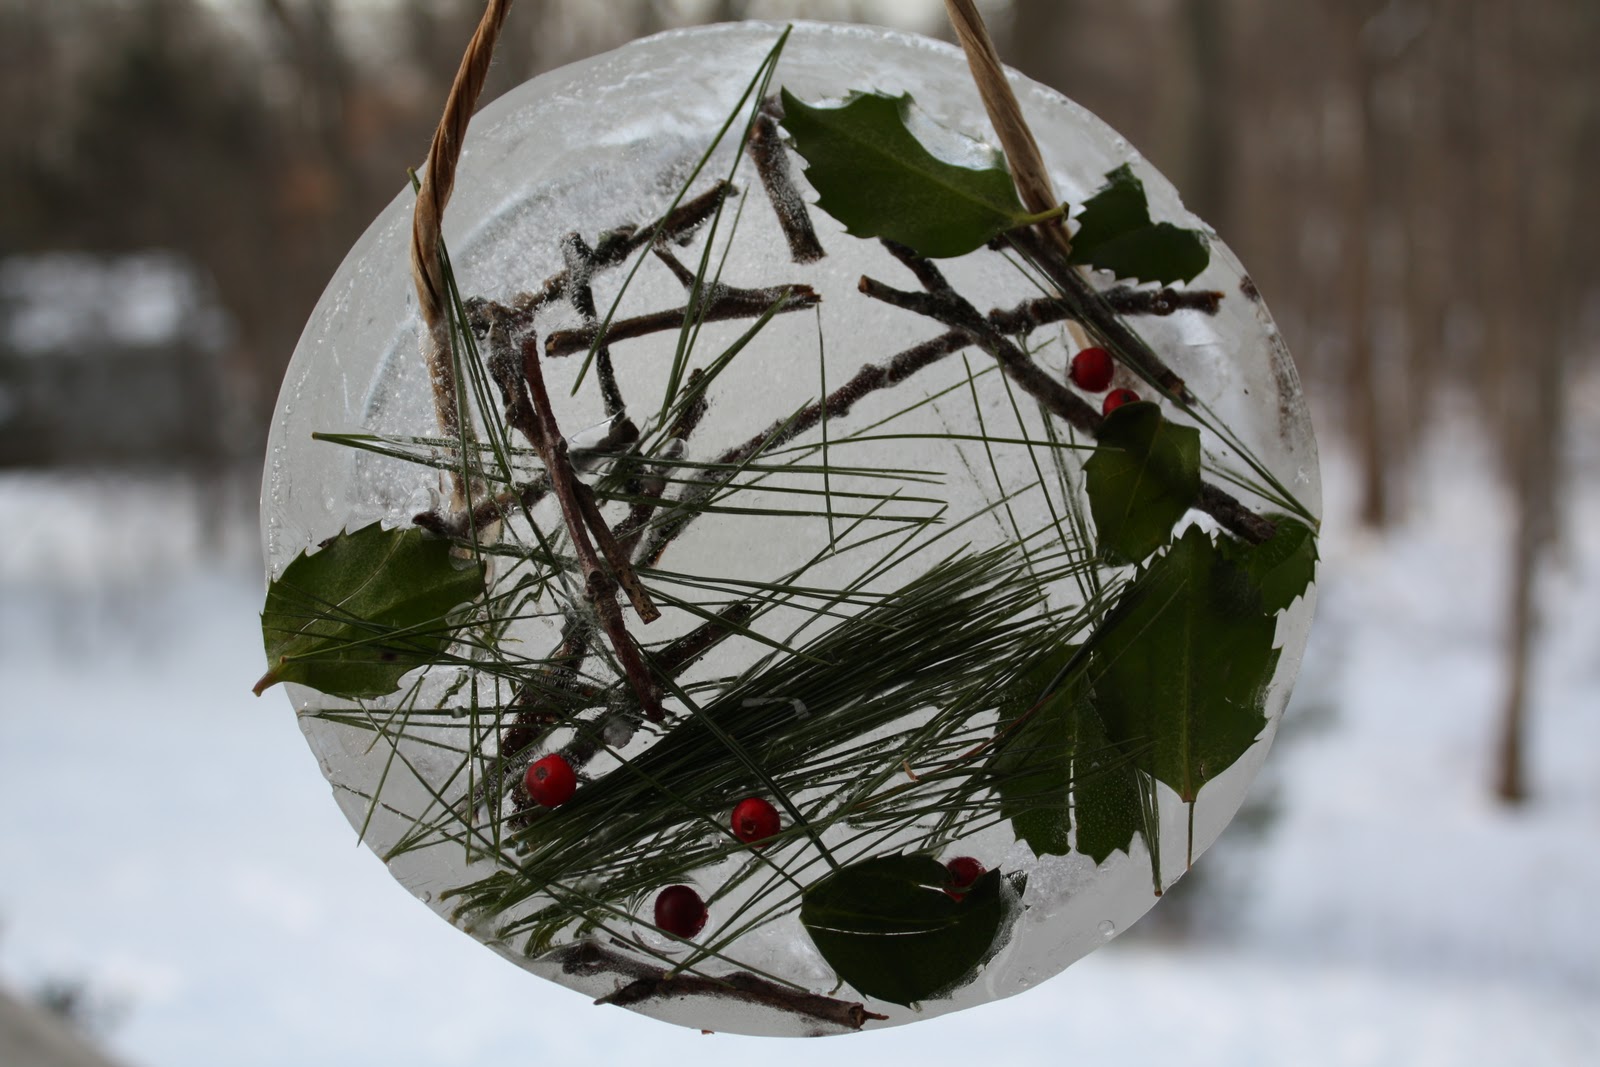 Sweet and Simple Things: Decorating with Ice